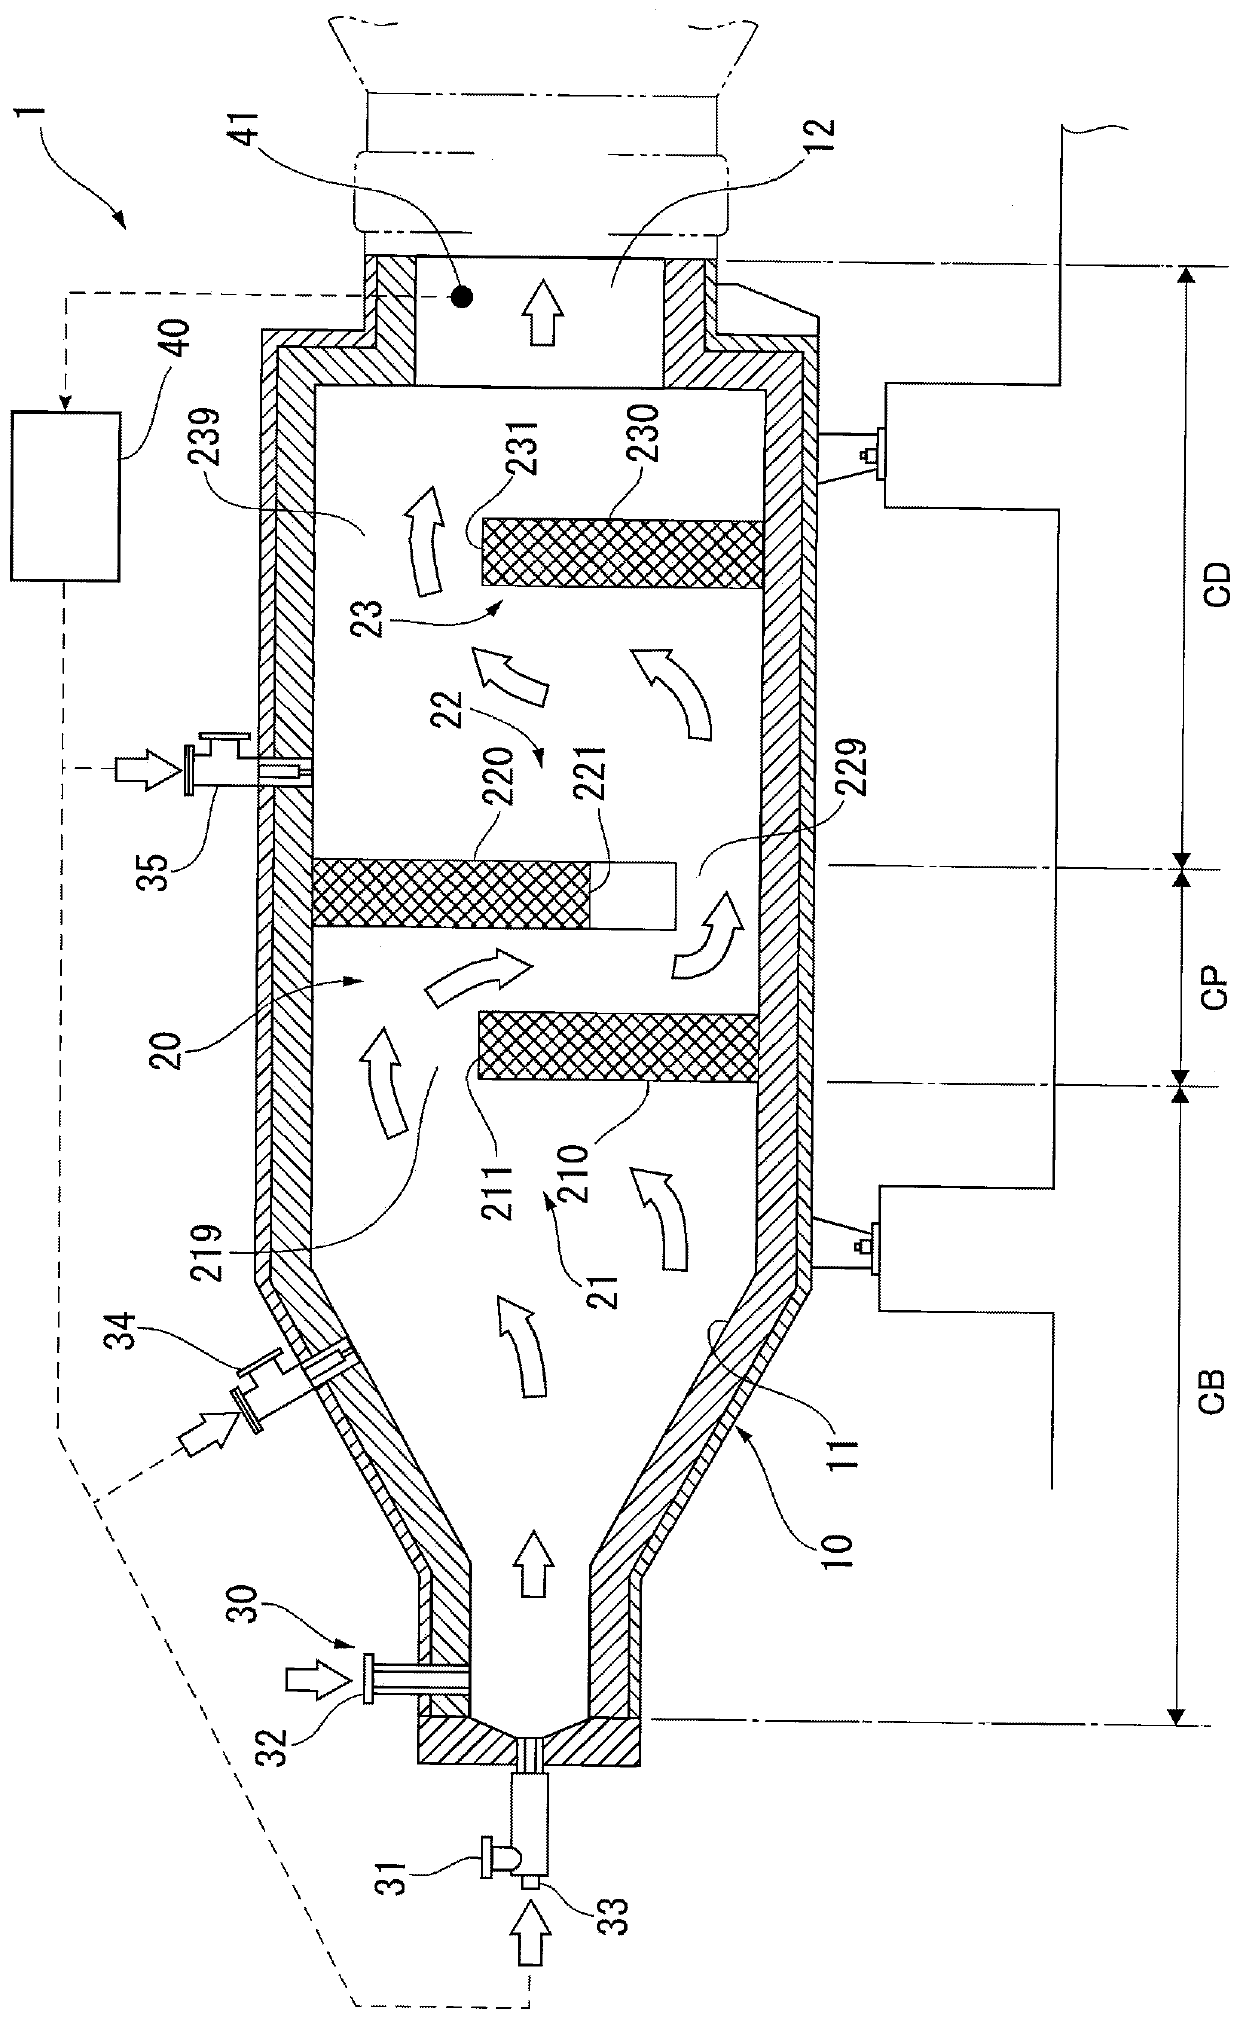 Nitrogen-containing waste liquid combustion furnace and its denitrification method